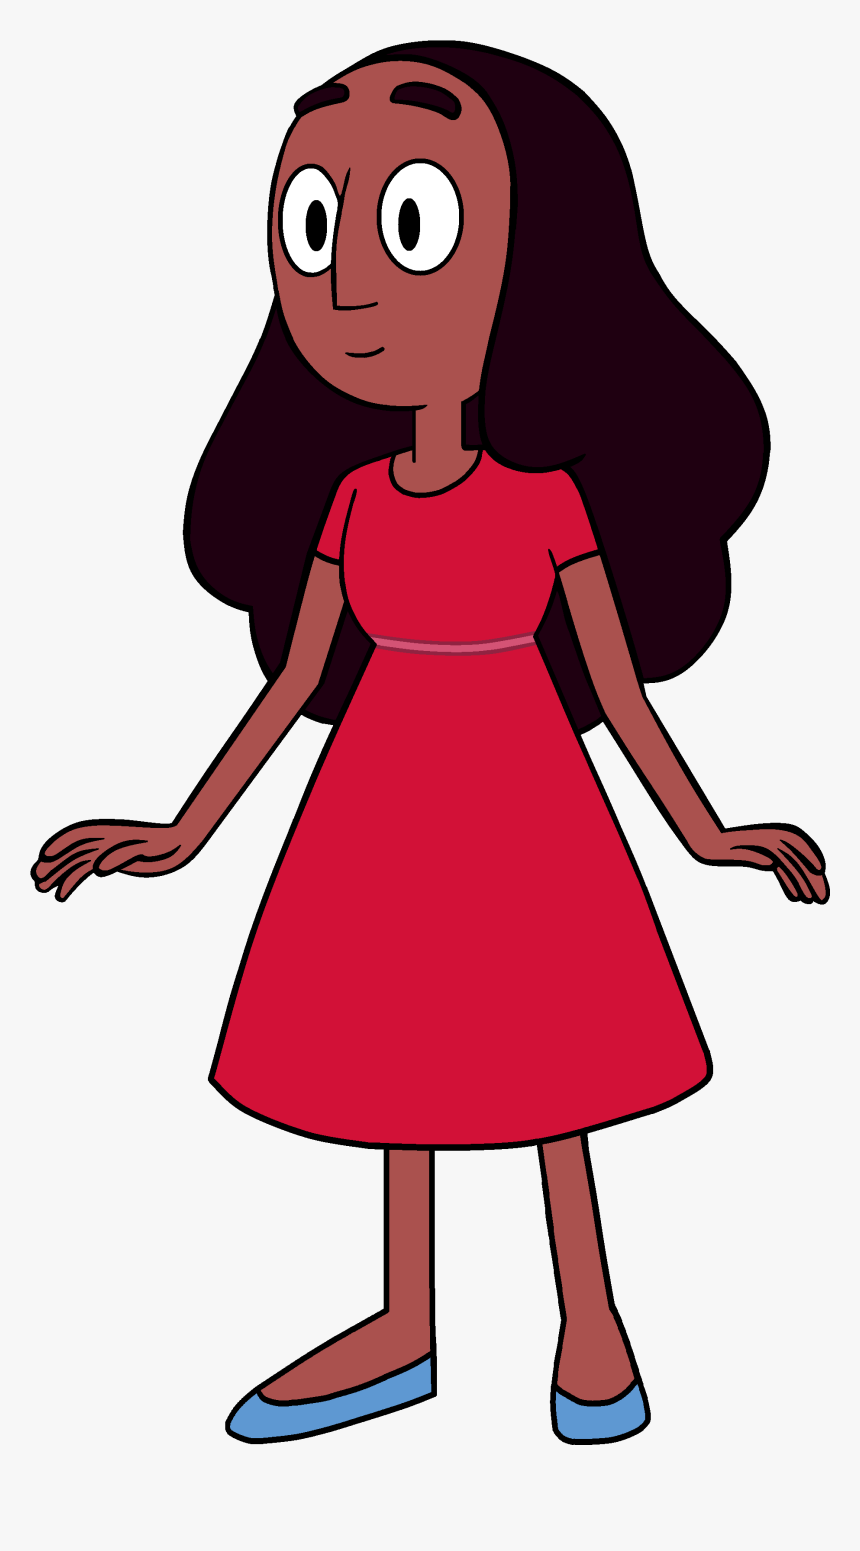 Steven"s Birthday Connie Model - Steven Universe Characters Connie, HD Png Download, Free Download